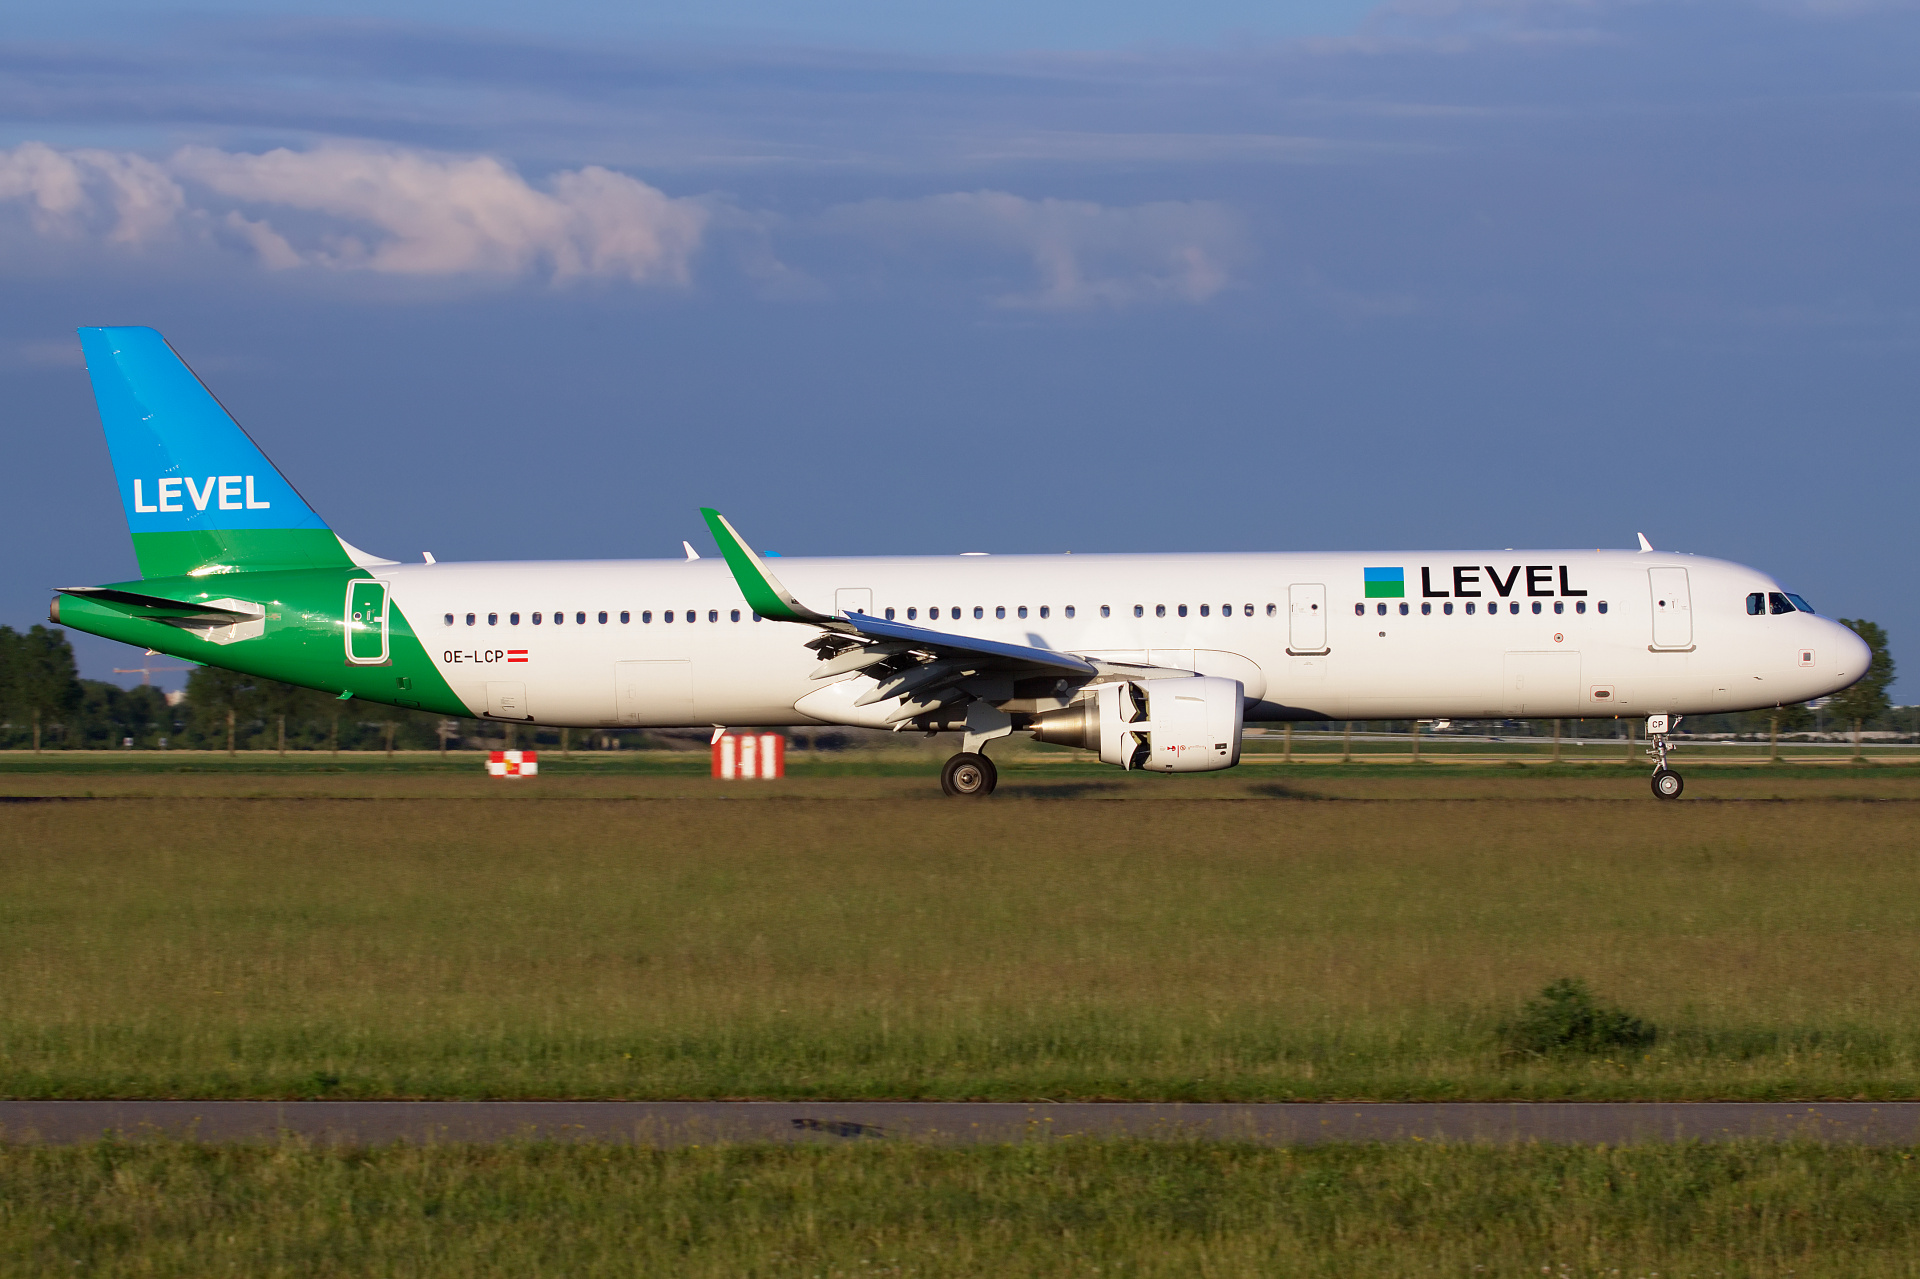 OE-LCP, Level (Samoloty » Spotting na Schiphol » Airbus A321-200)